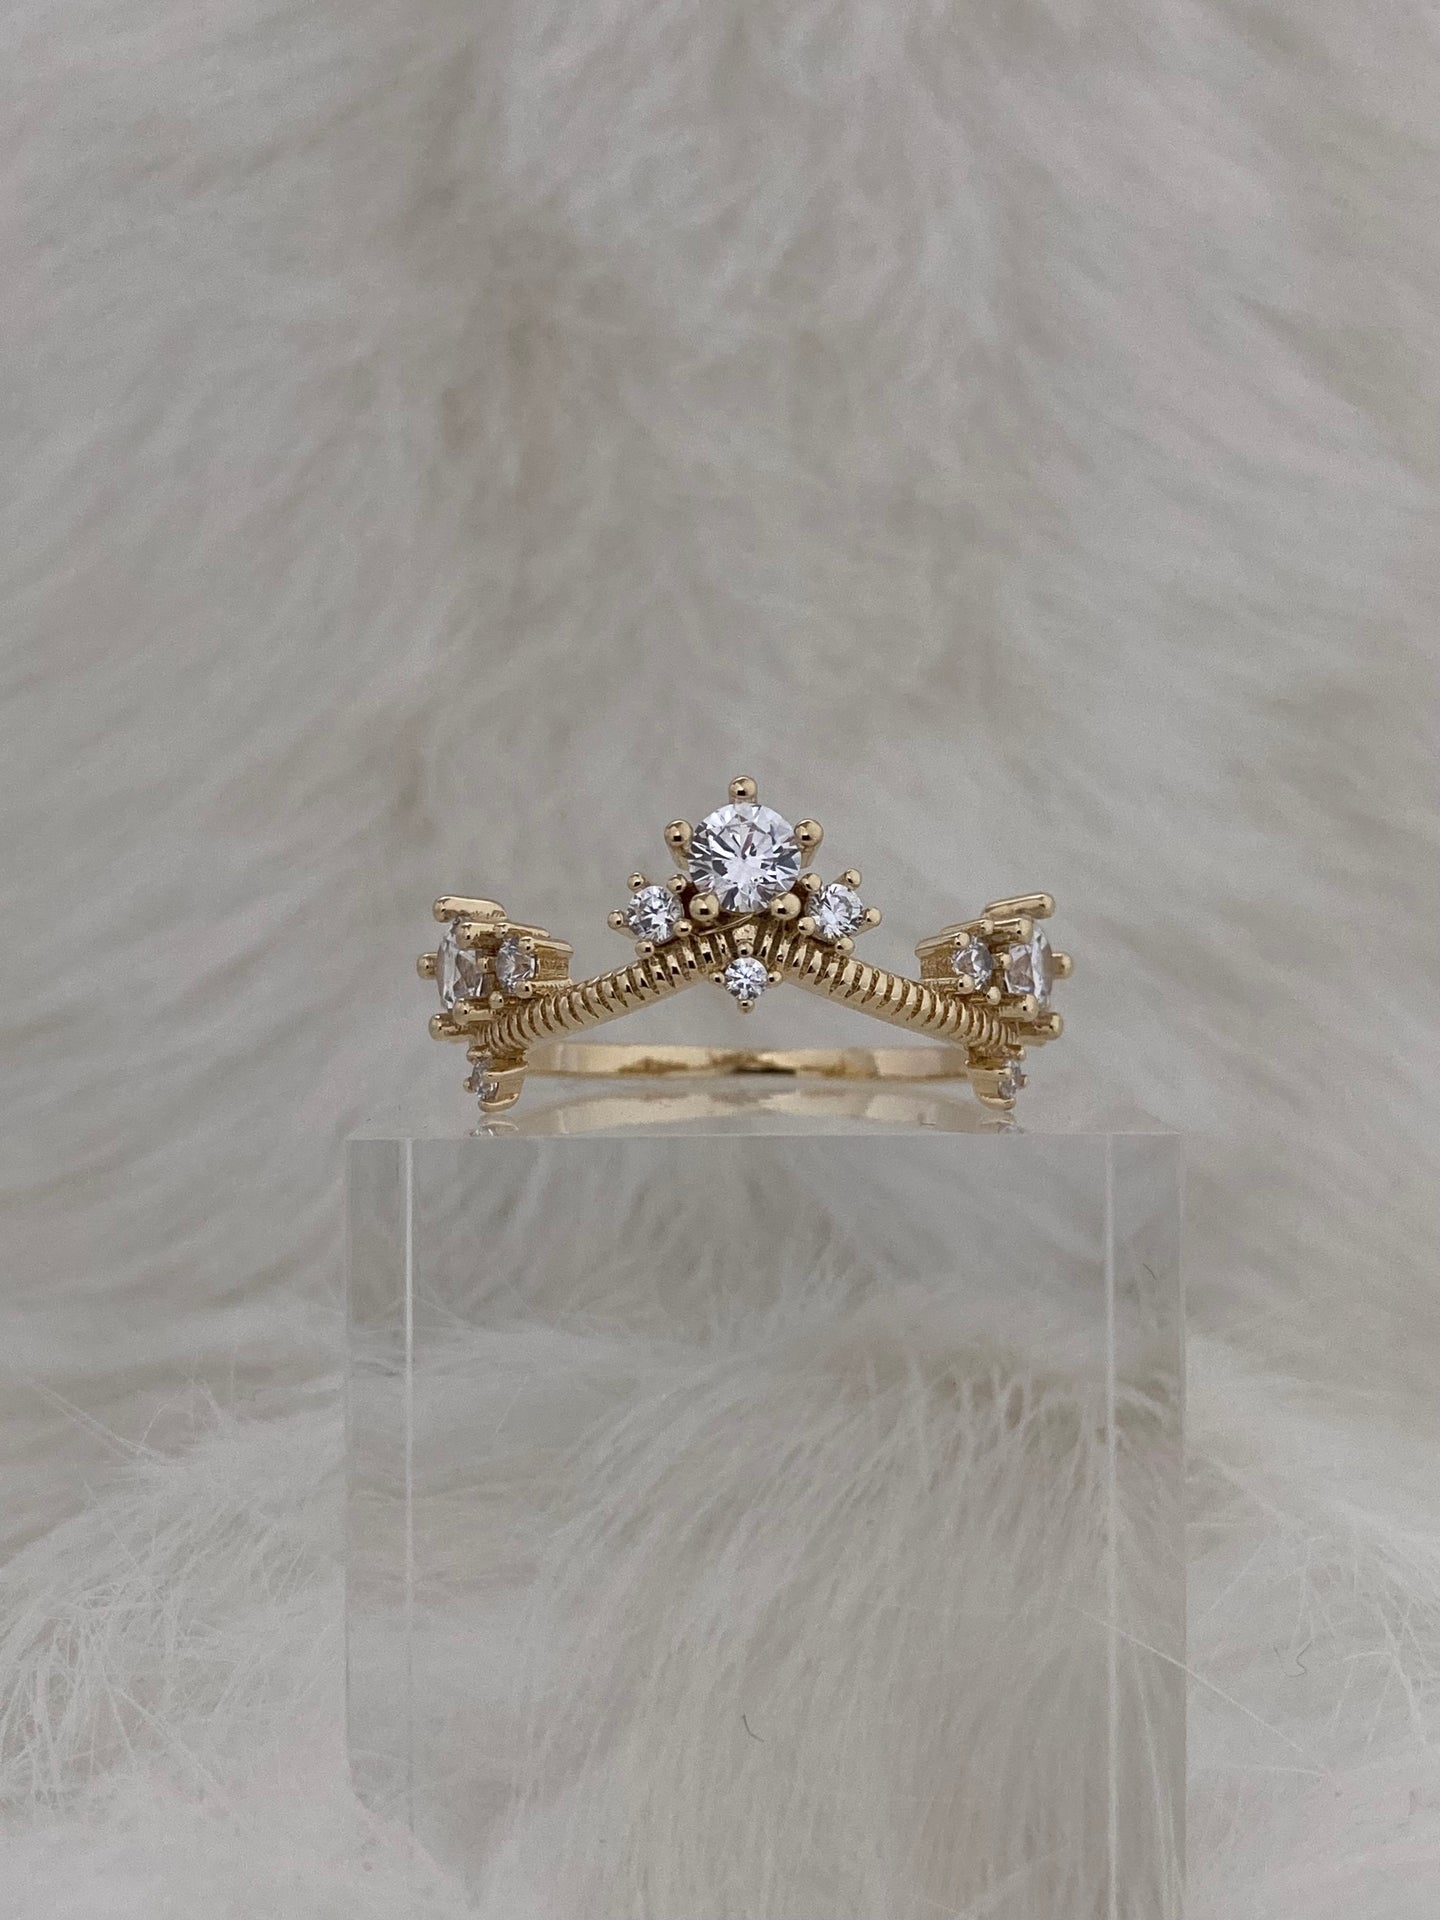 Dainty rings, dainty ring stack, dainty ring stacking, gold dainty ring stack, dainty stackable ring, dainty ring gold stacks, stackable rings, stackable ring sets, dainty rings gold, dainty rings vintage, CZ rings that look real, cz rings gold